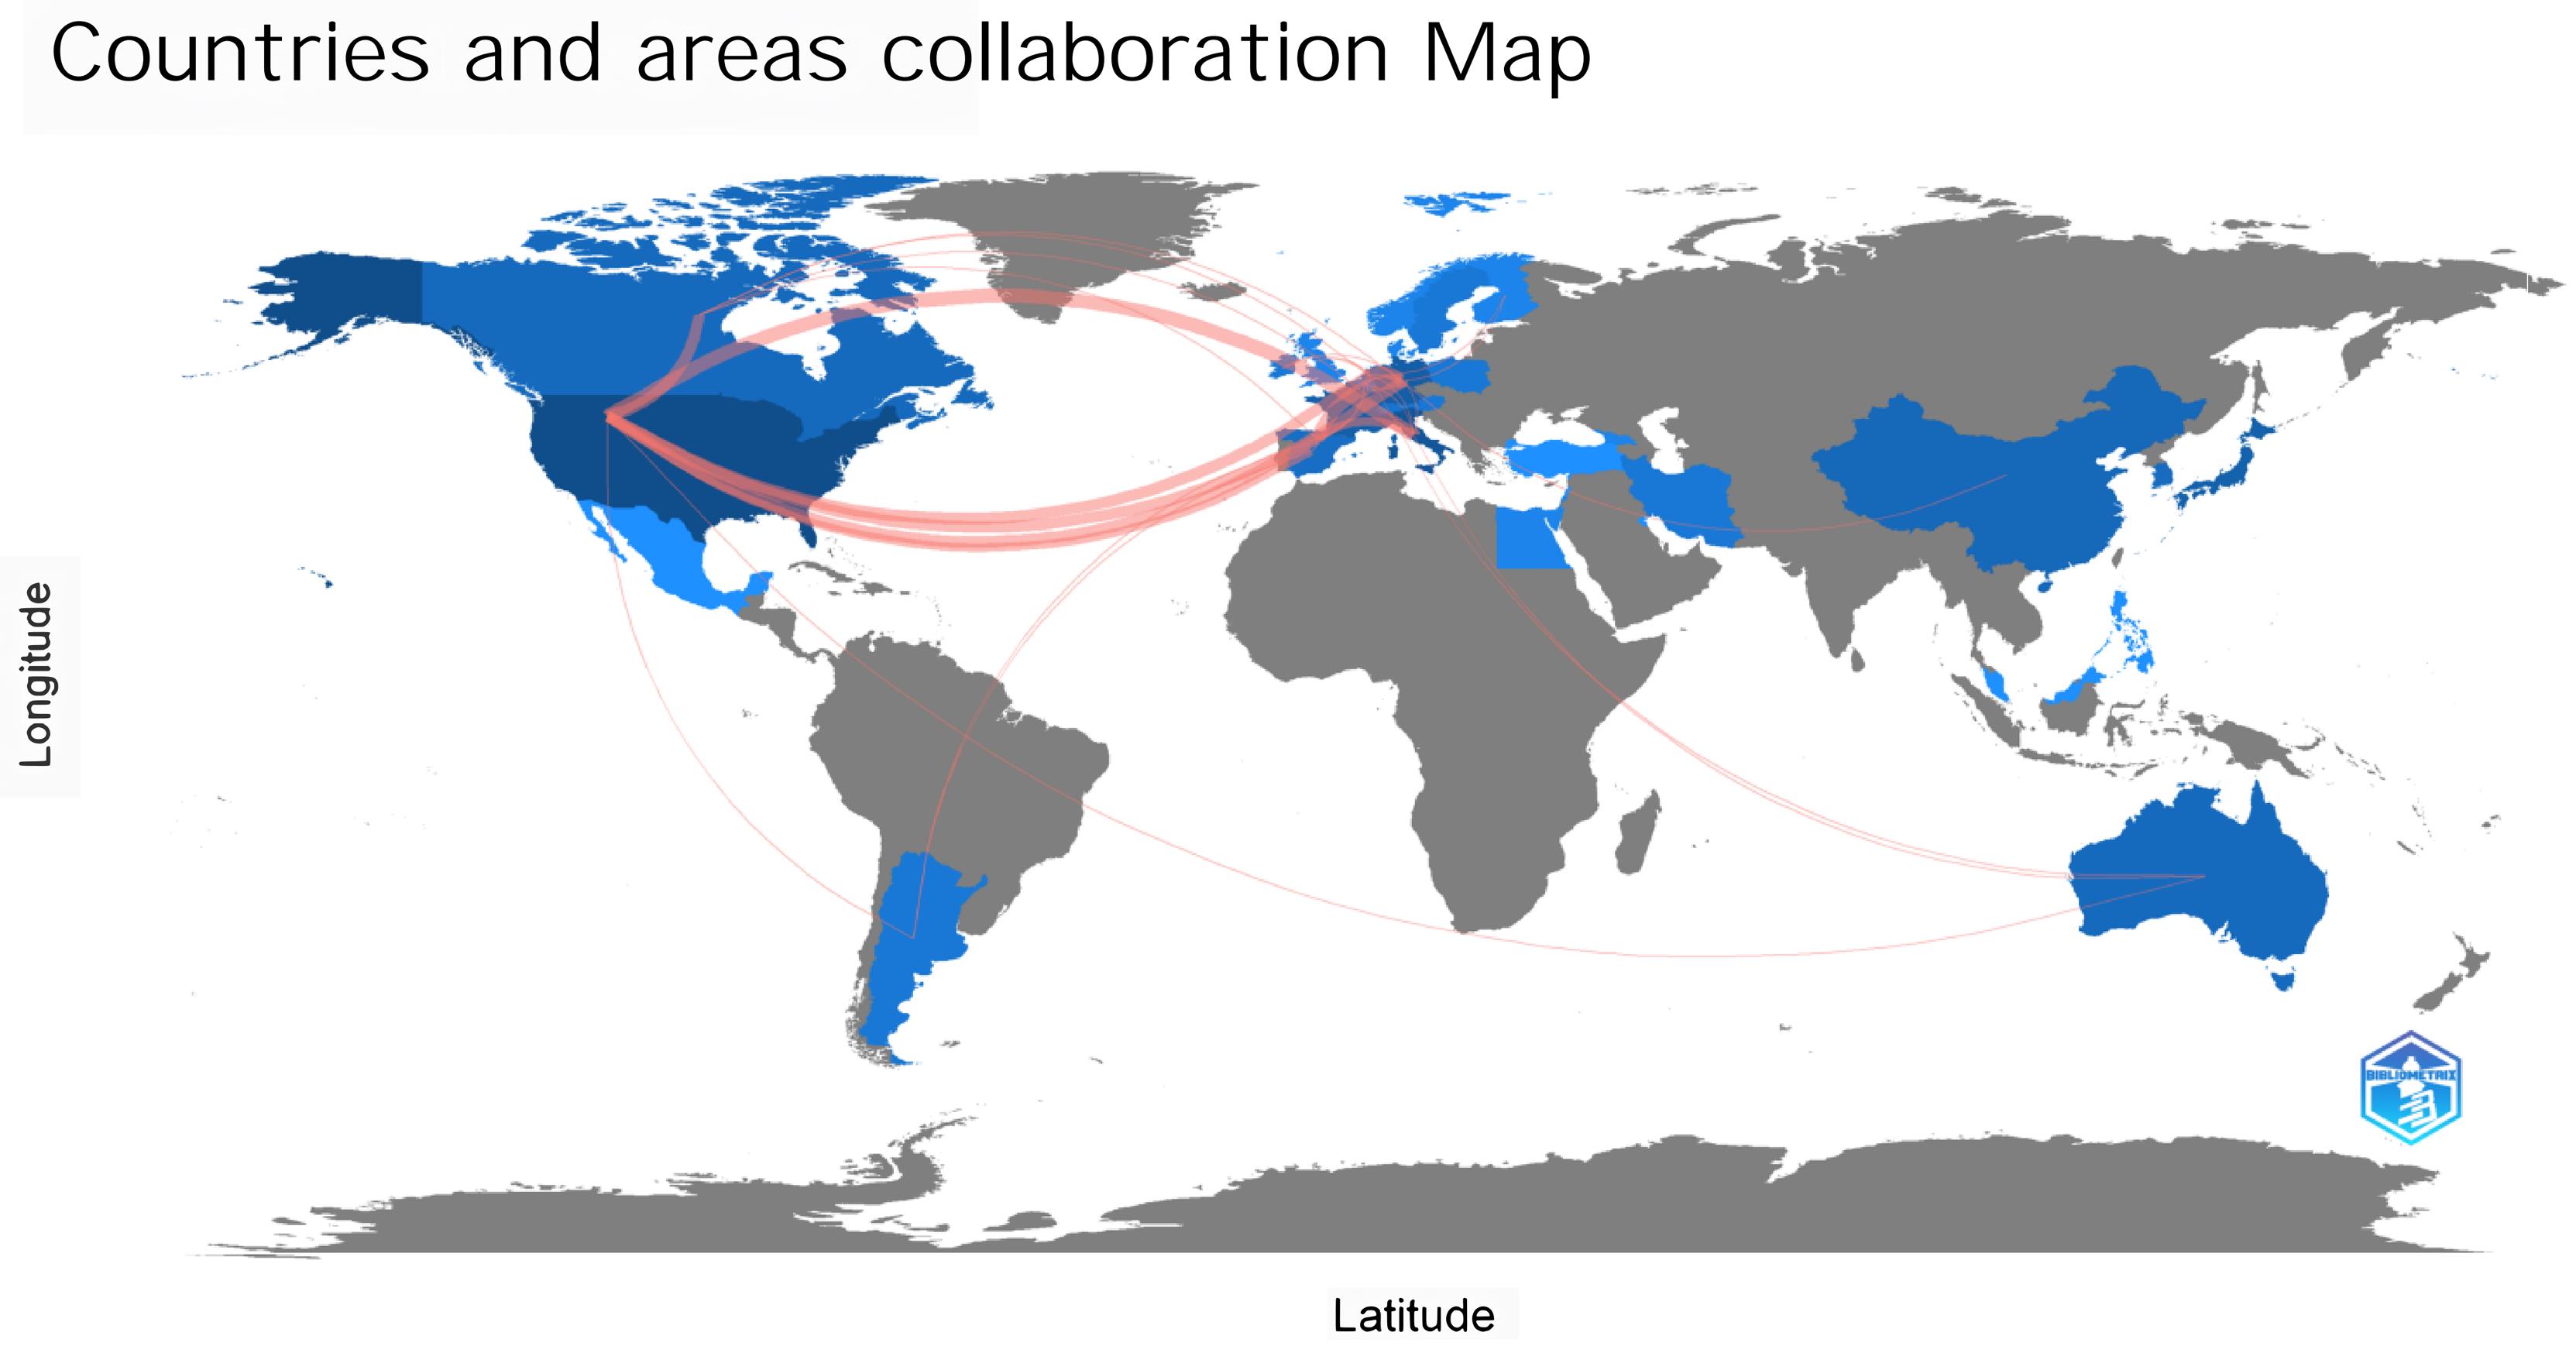 Map of countries and areas with scientific production and collaboration of amyotrophic lateral sclerosis studies.